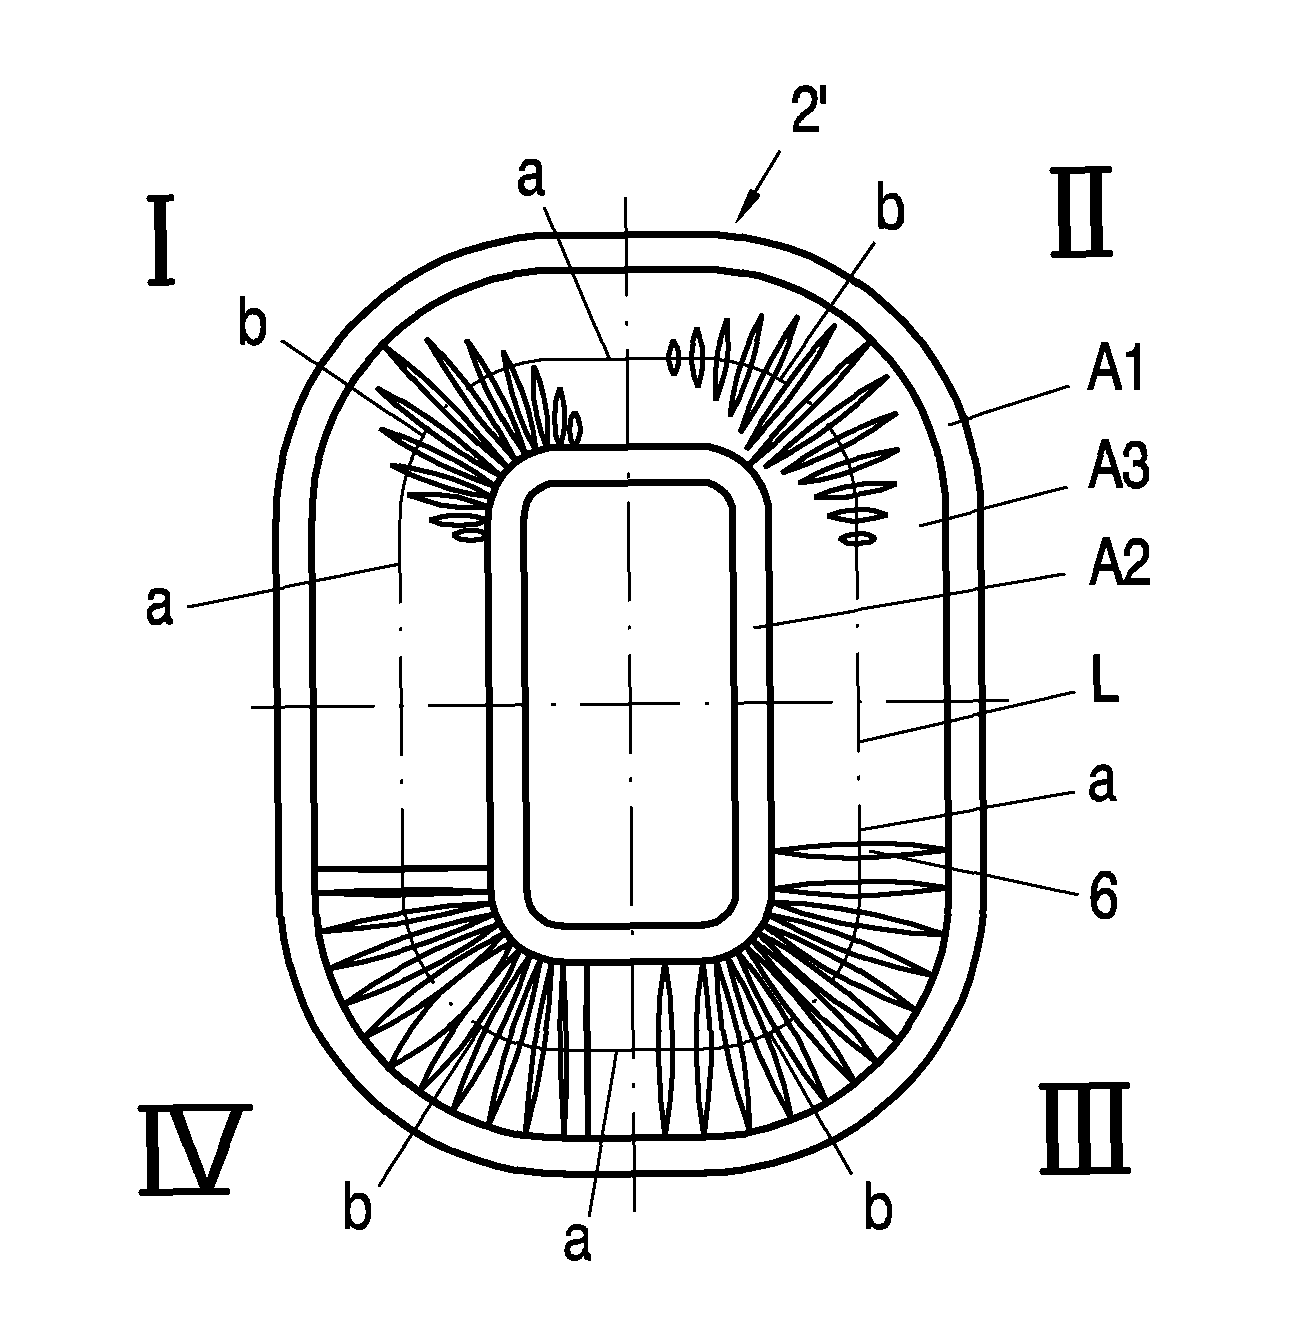 Membrane for an electroacoustic transducer